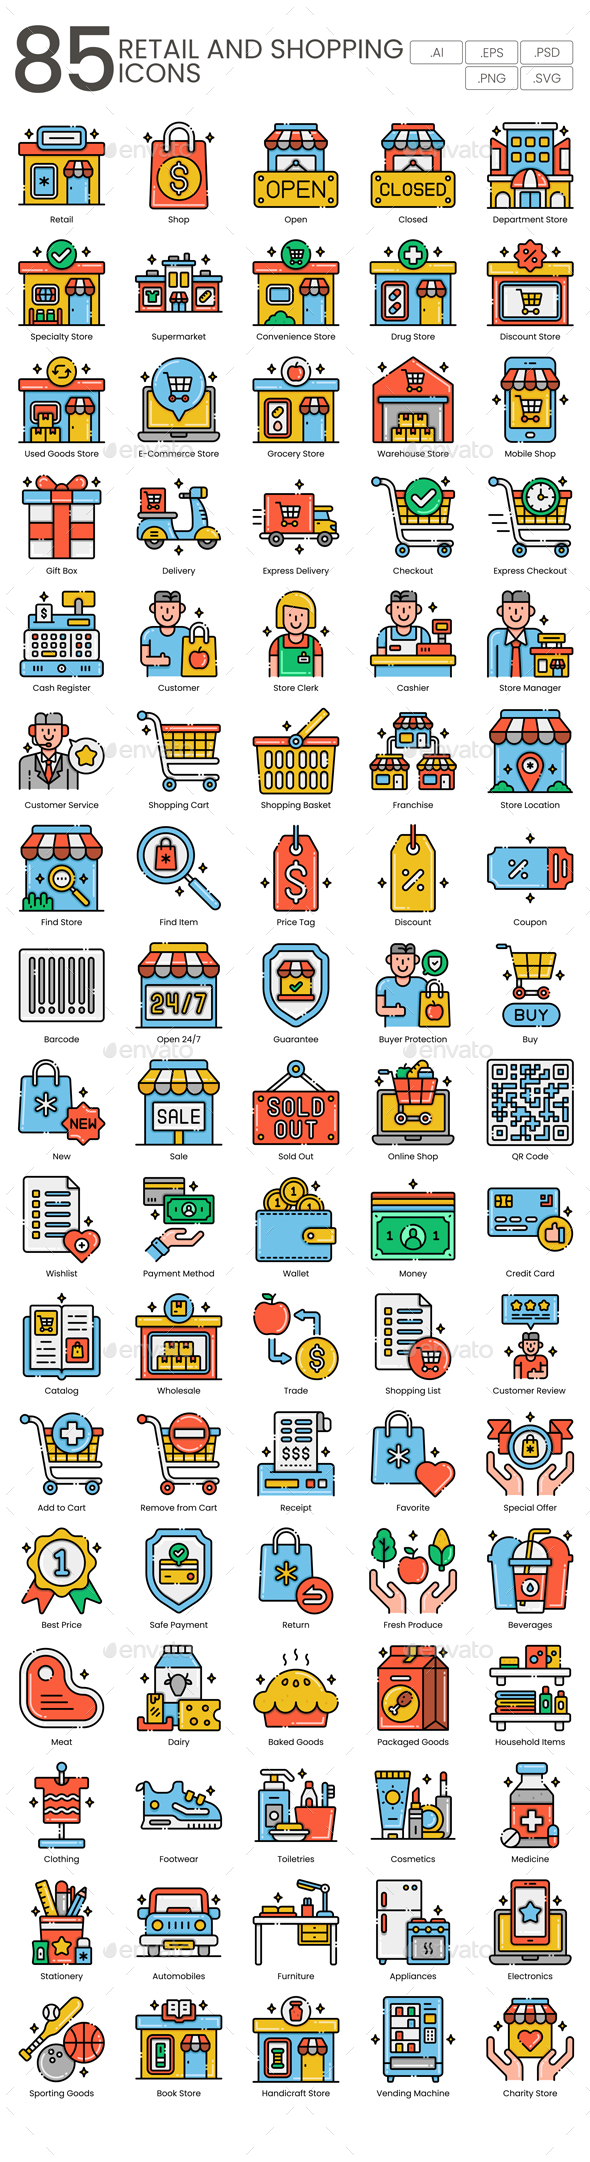 [DOWNLOAD]85 Retail and Shopping Icons | Aesthetics Series